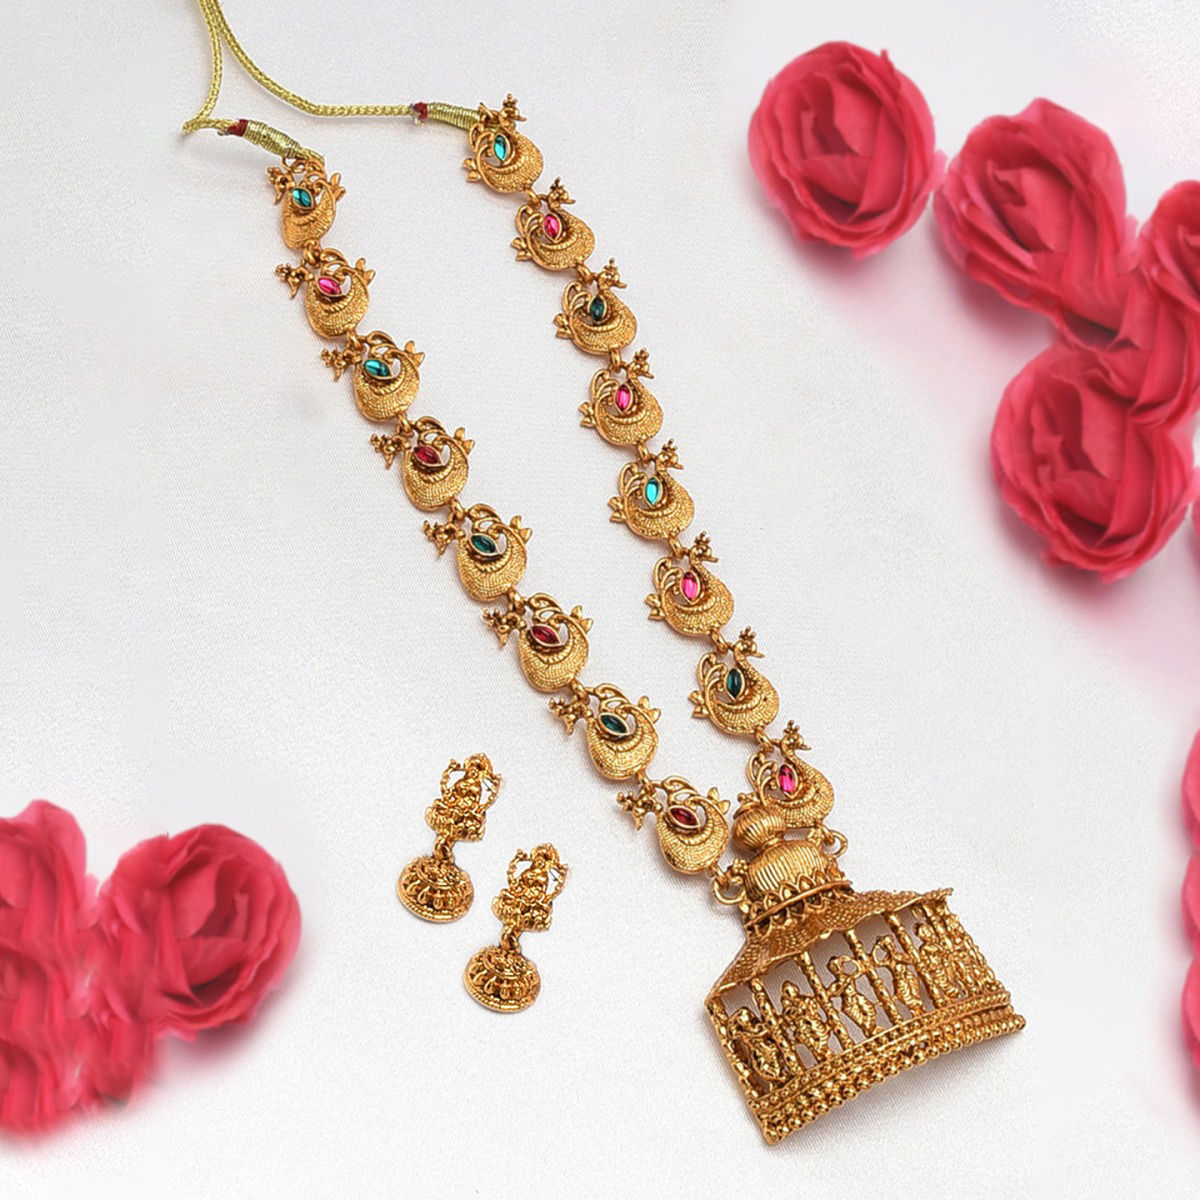 MORNI PEACOCK FEATHERS AND CONCH SHELL NECKLACE SET FOR HALDI MEHAND   wwwsoosicoin